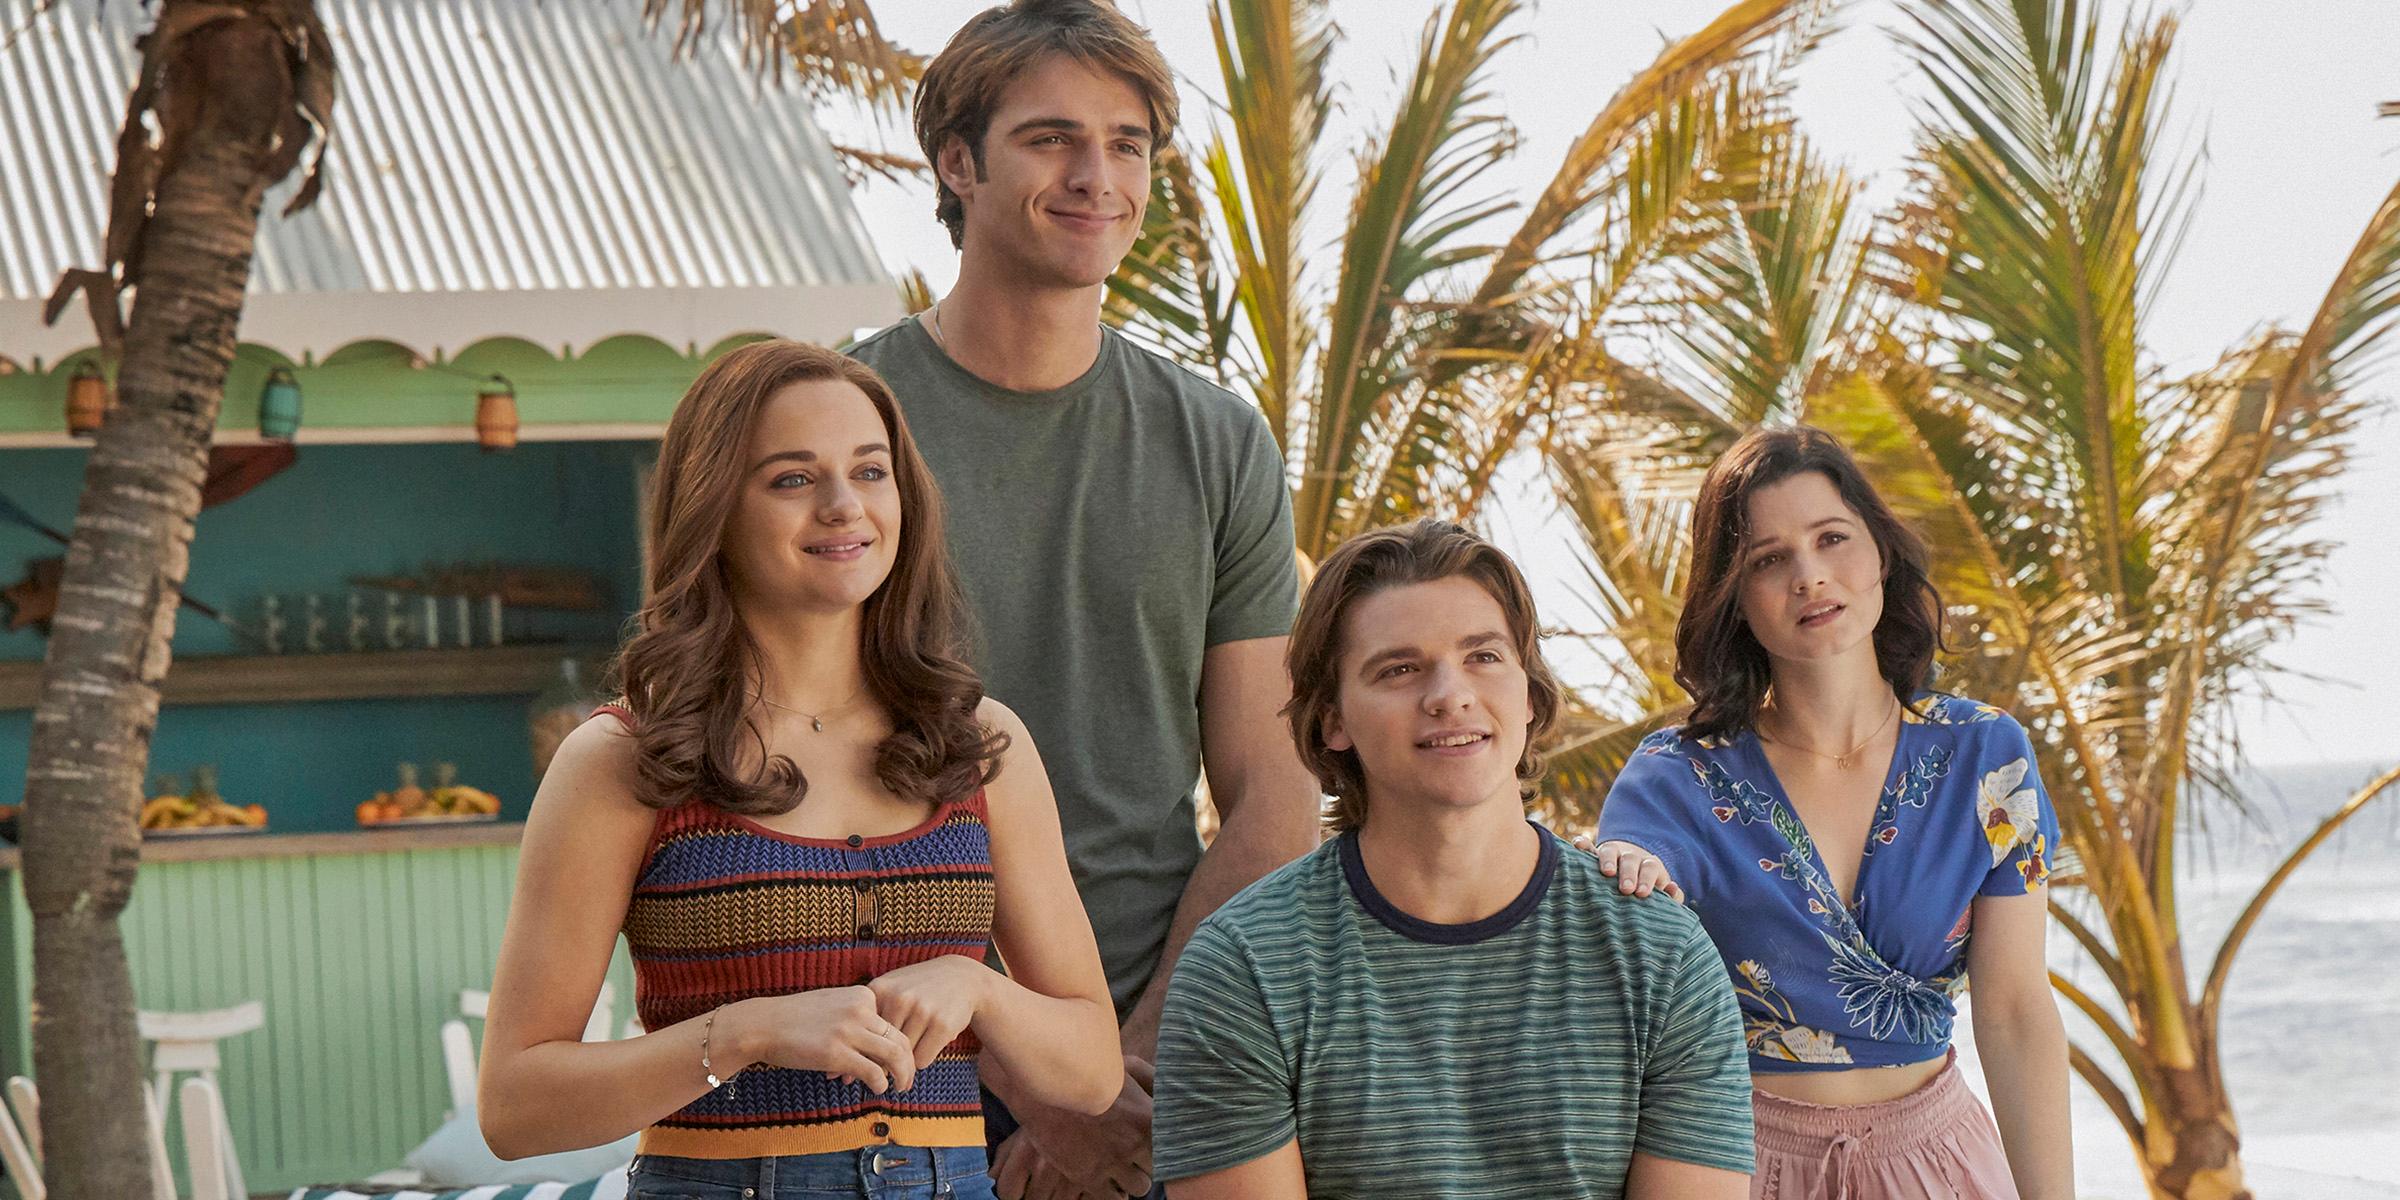 Rule Number 19 in 'The Kissing Booth 3' Is A Major Plot in the New Movie  (SPOILERS)